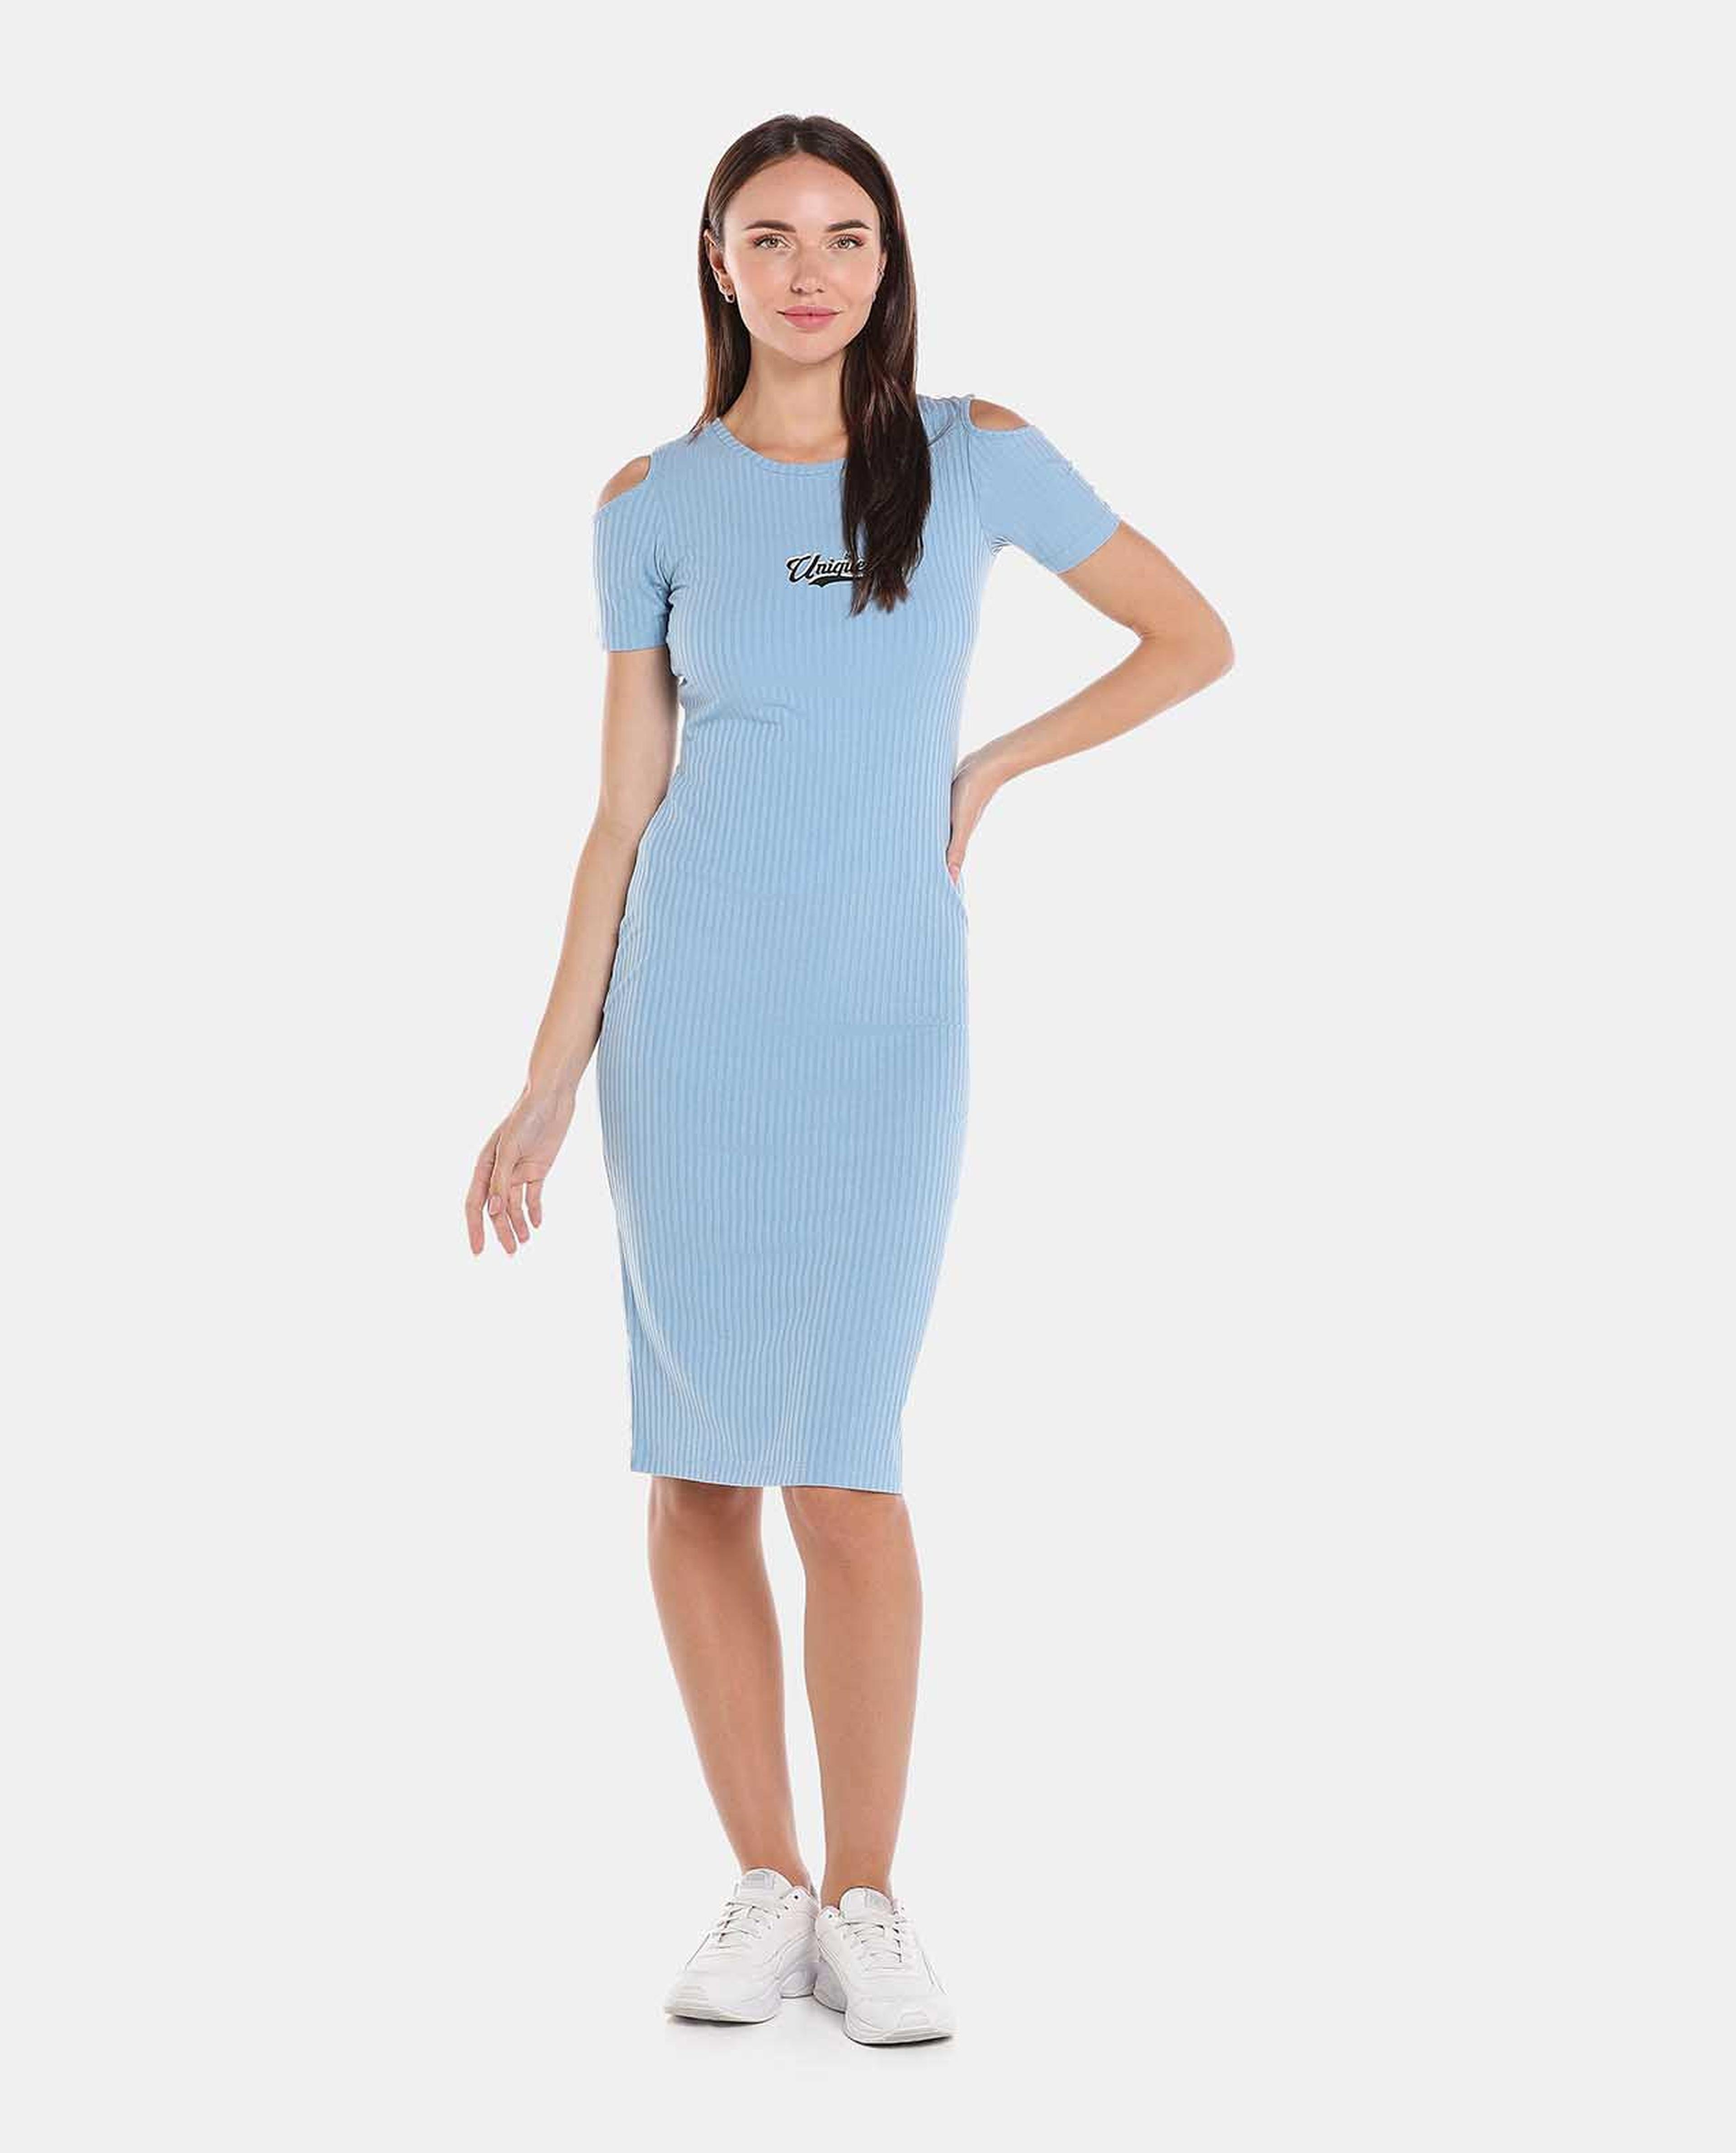 Blue Solid Bodycon Knee Length Dress